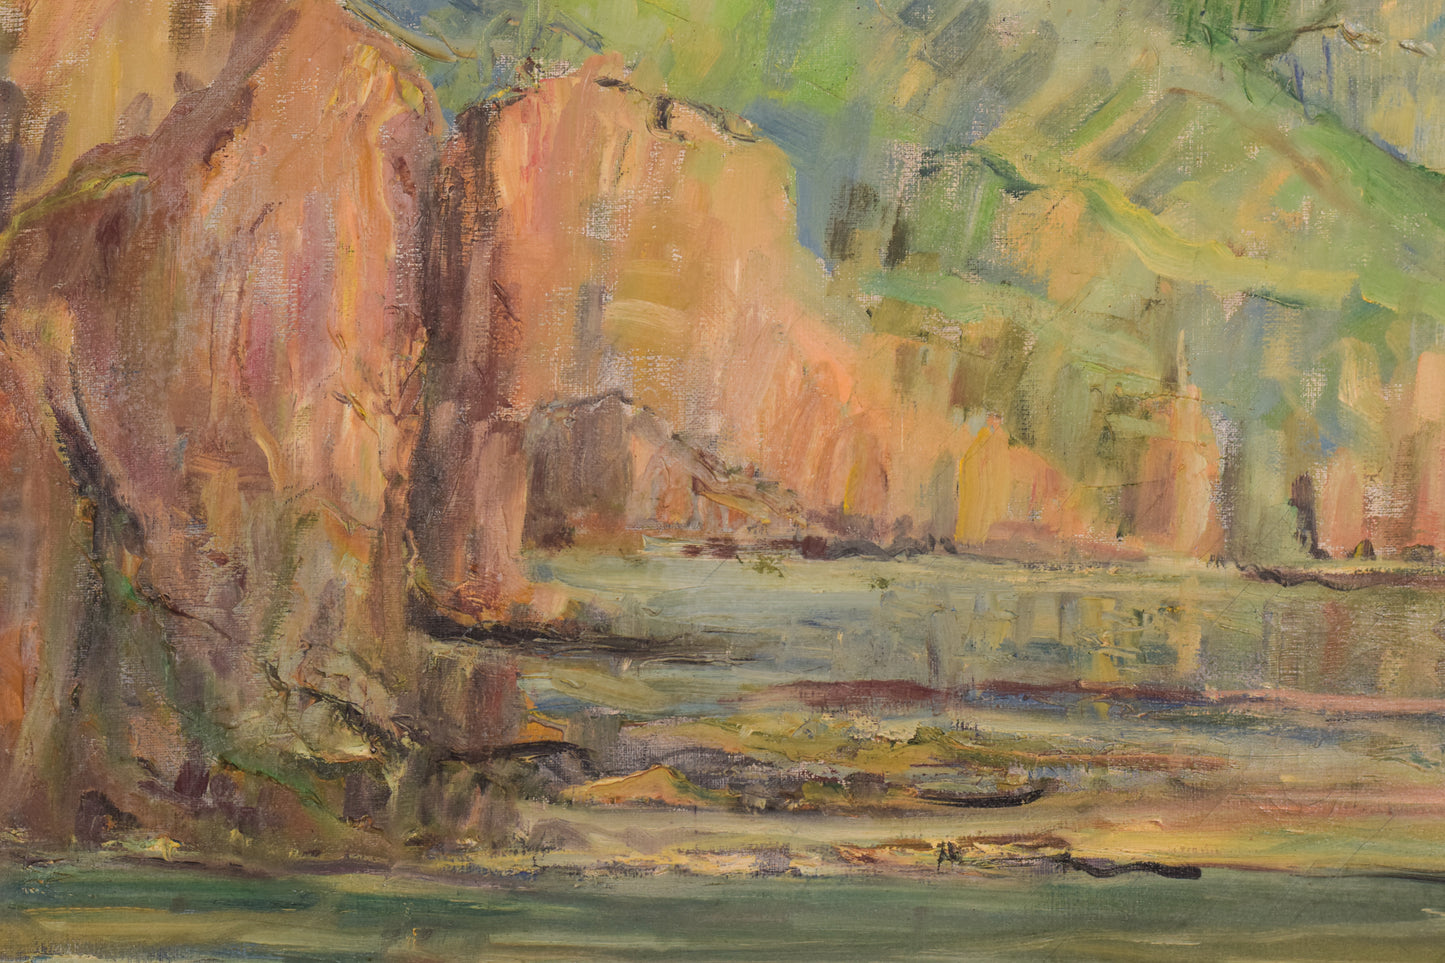 Impressionist Seascape with Cliffs - Oil on Canvas